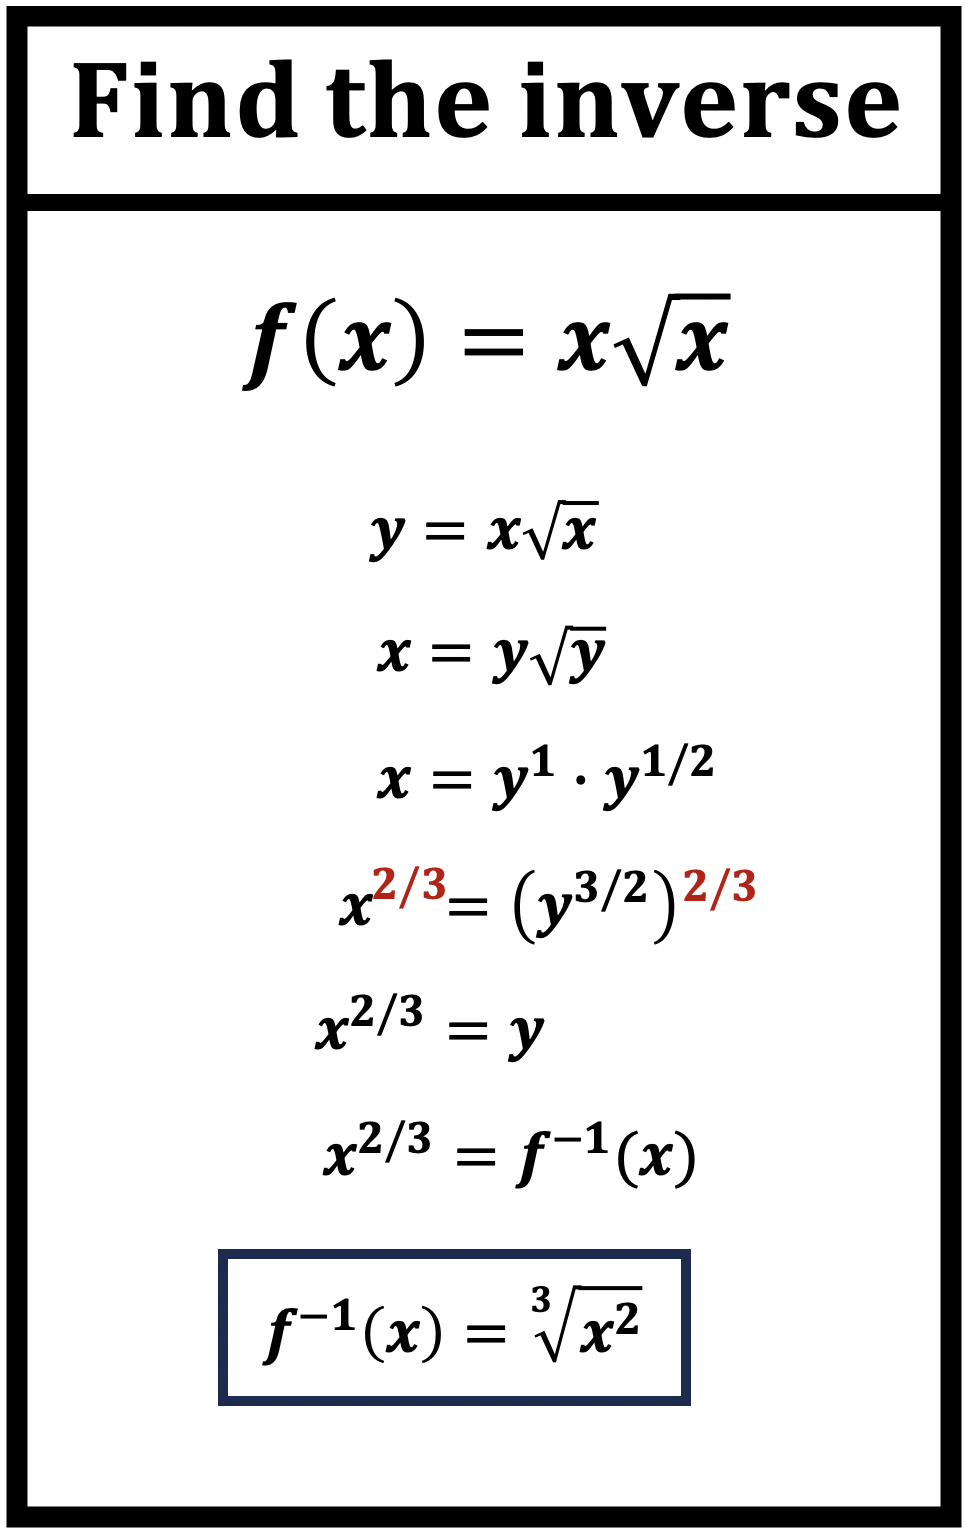 Inverse of a function Example